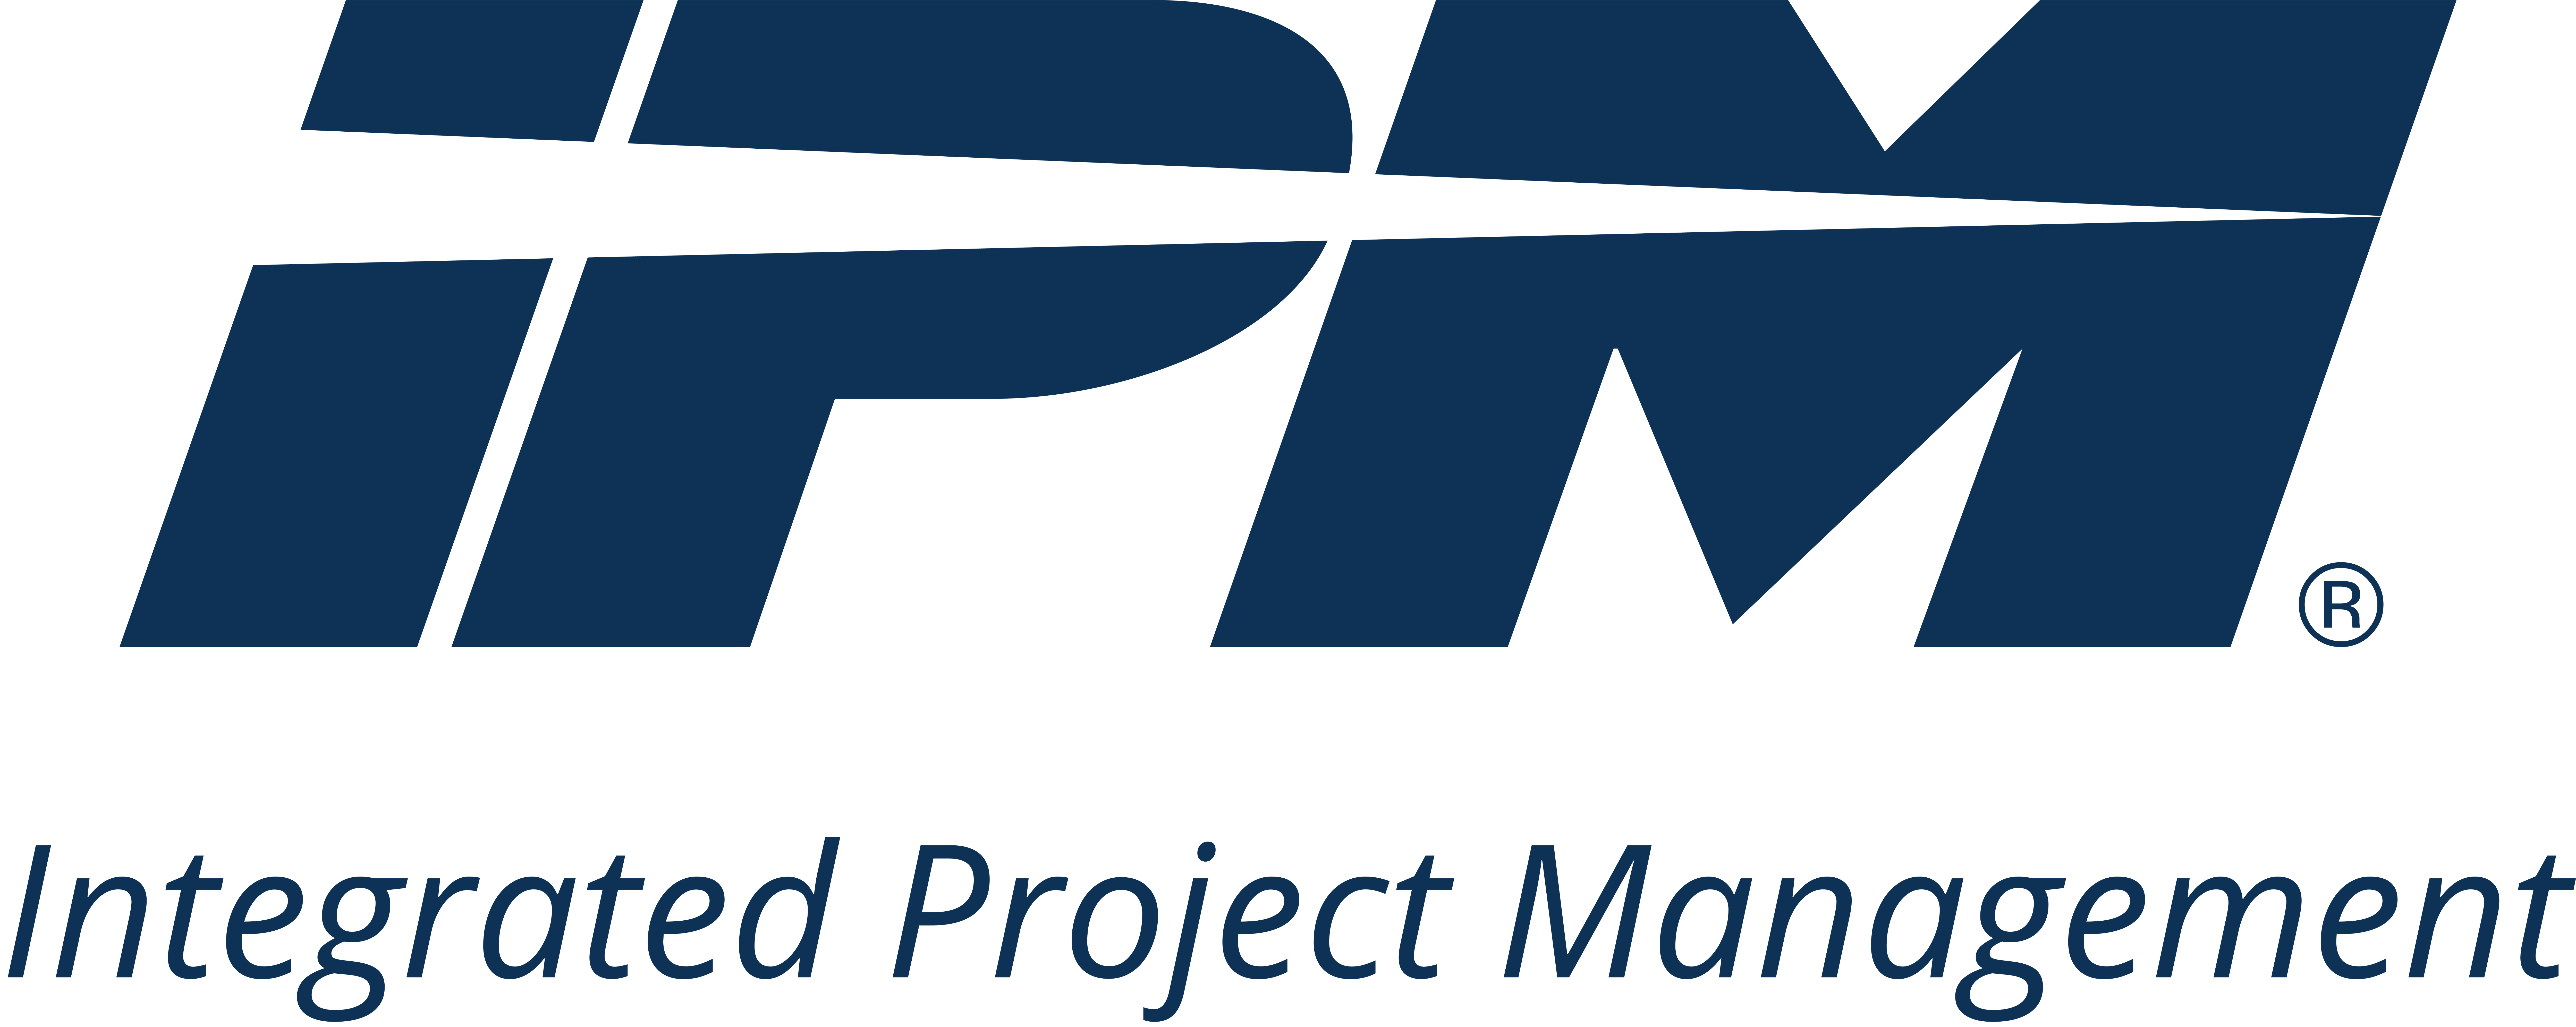 Integrated Project Management Company